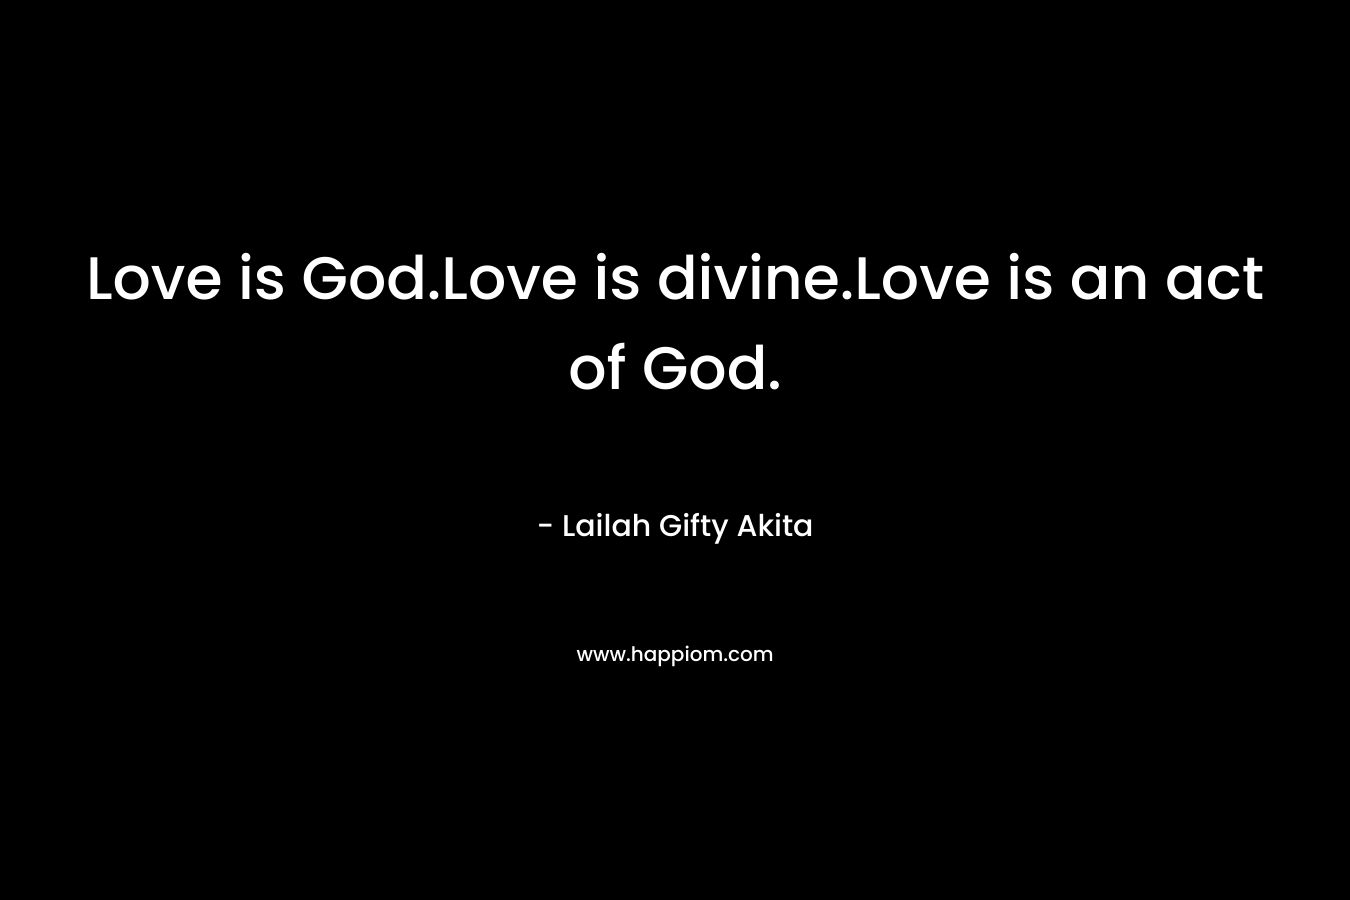 Love is God.Love is divine.Love is an act of God.